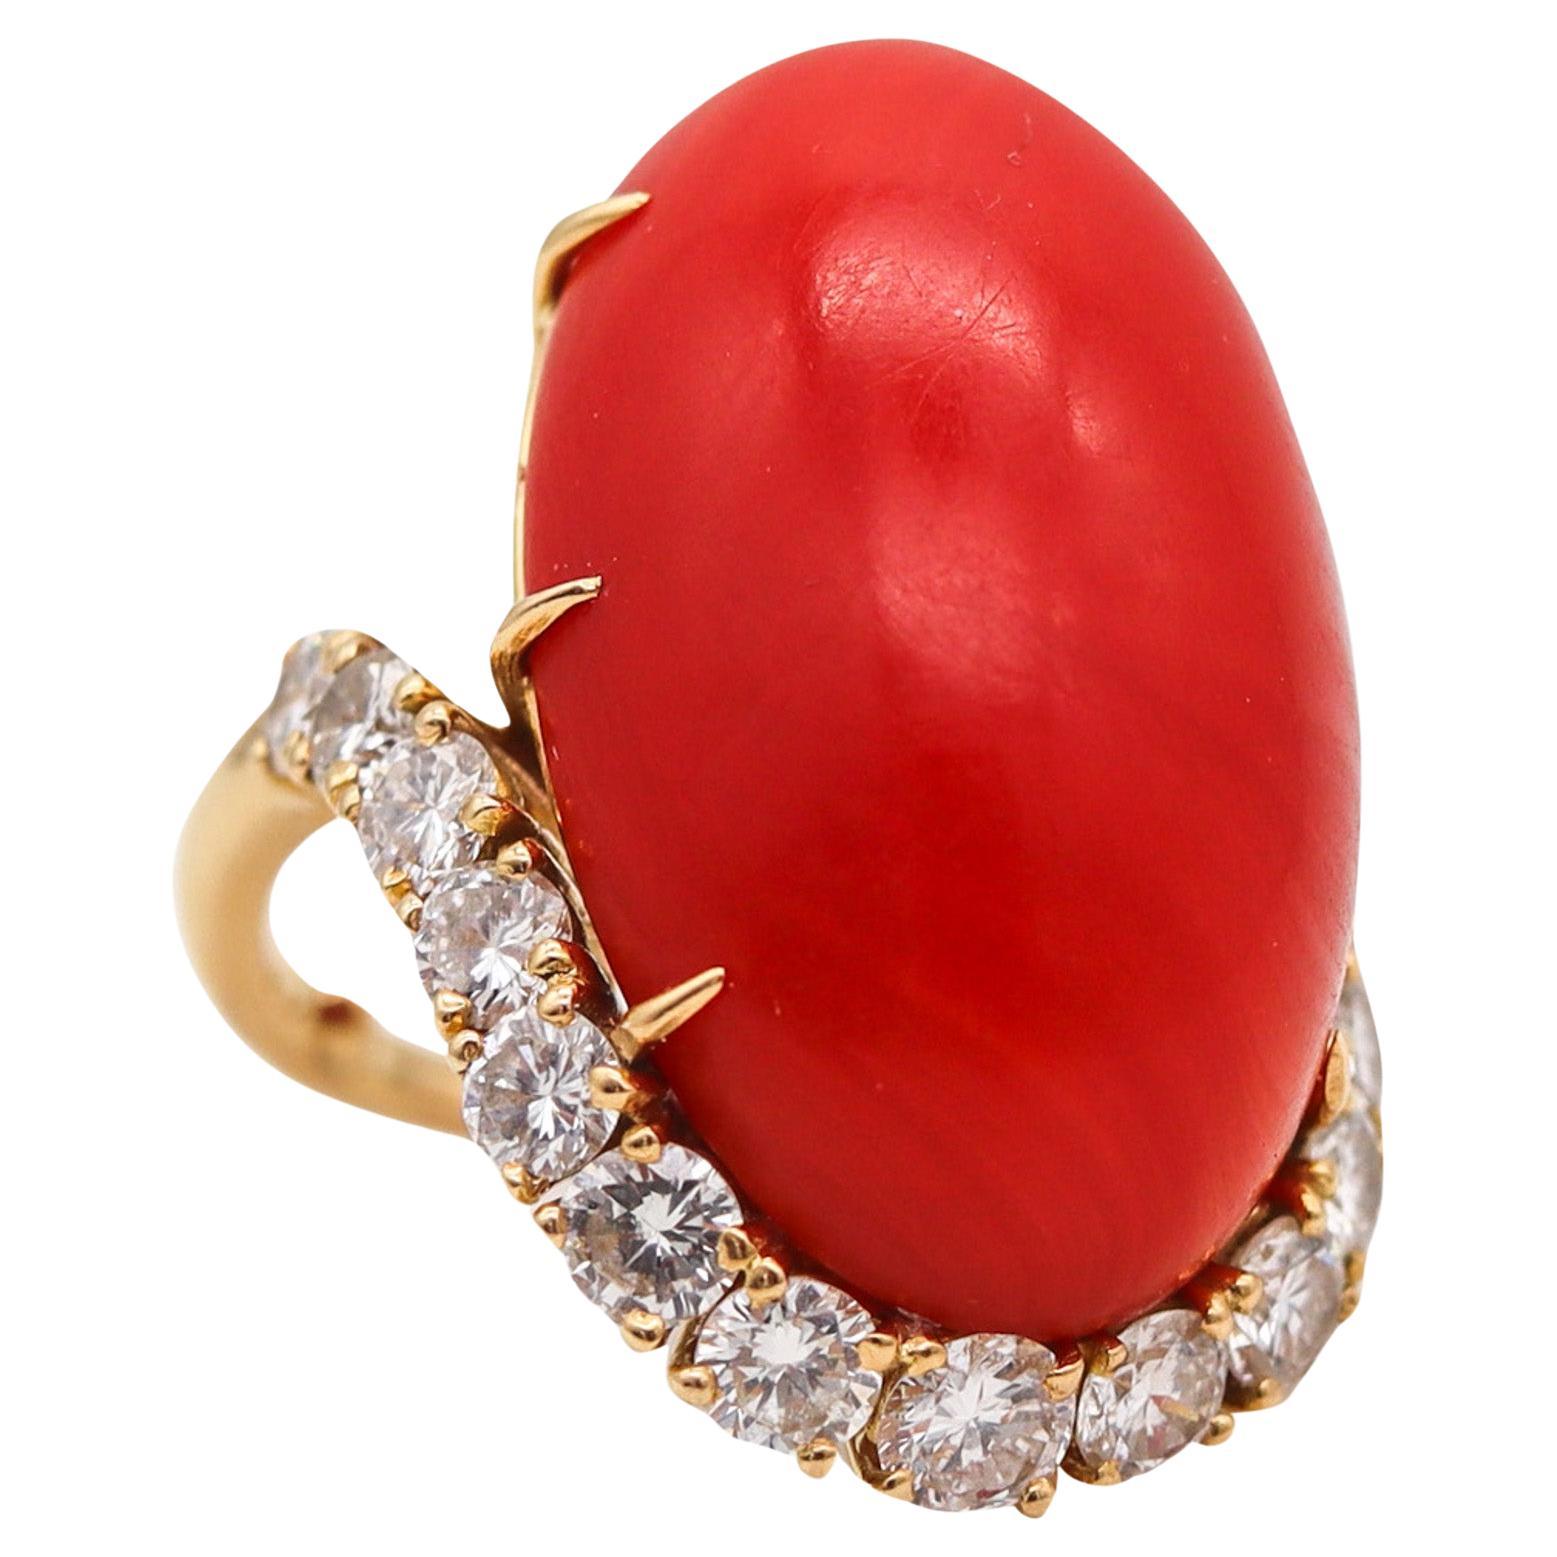 Boucheron Paris 1950 Modernist Ring In 18Kt Gold With 27.52 Ctw Diamonds & Coral For Sale